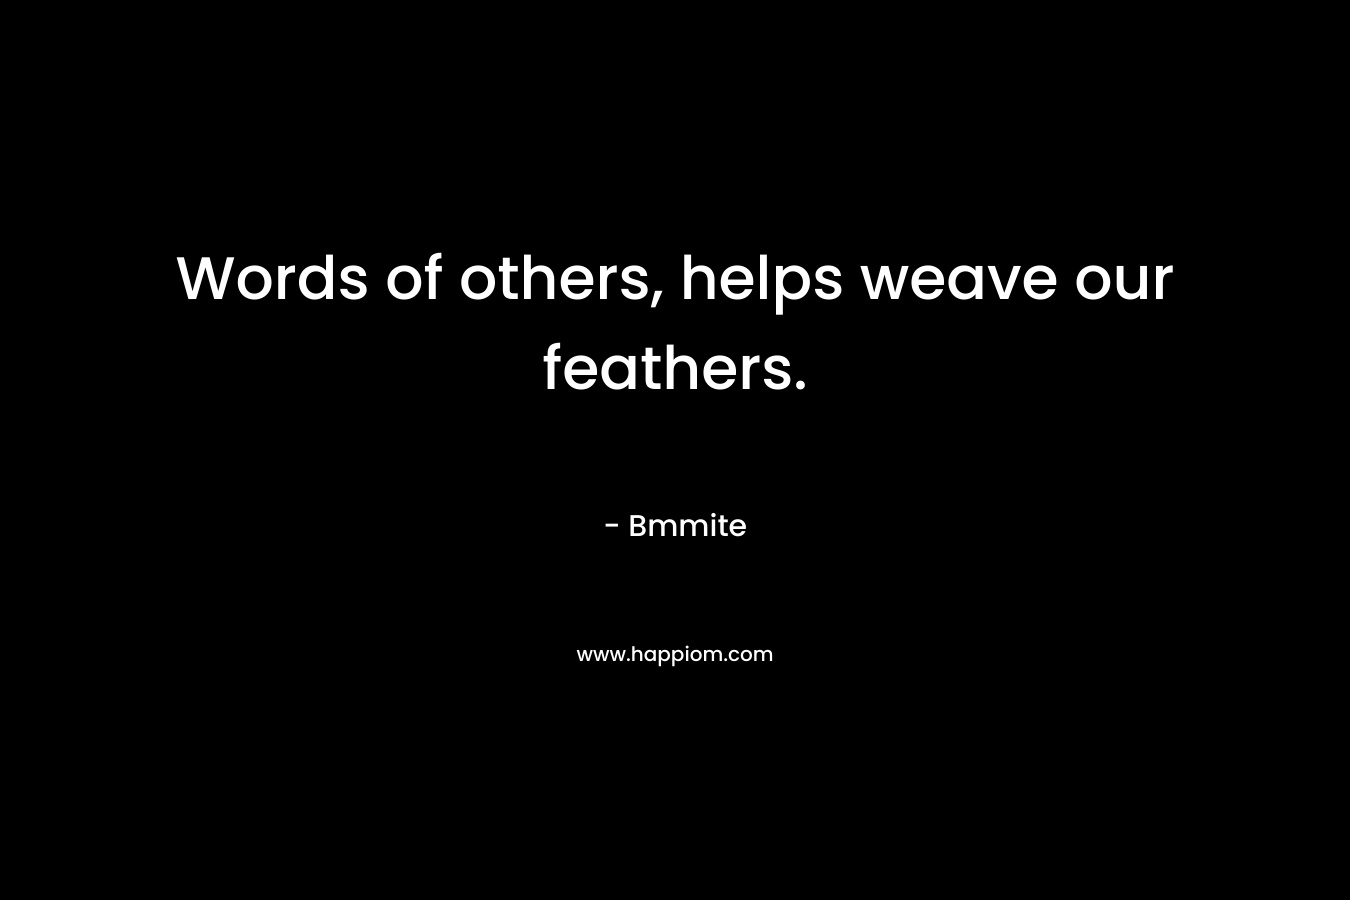 Words of others, helps weave our feathers. – Bmmite